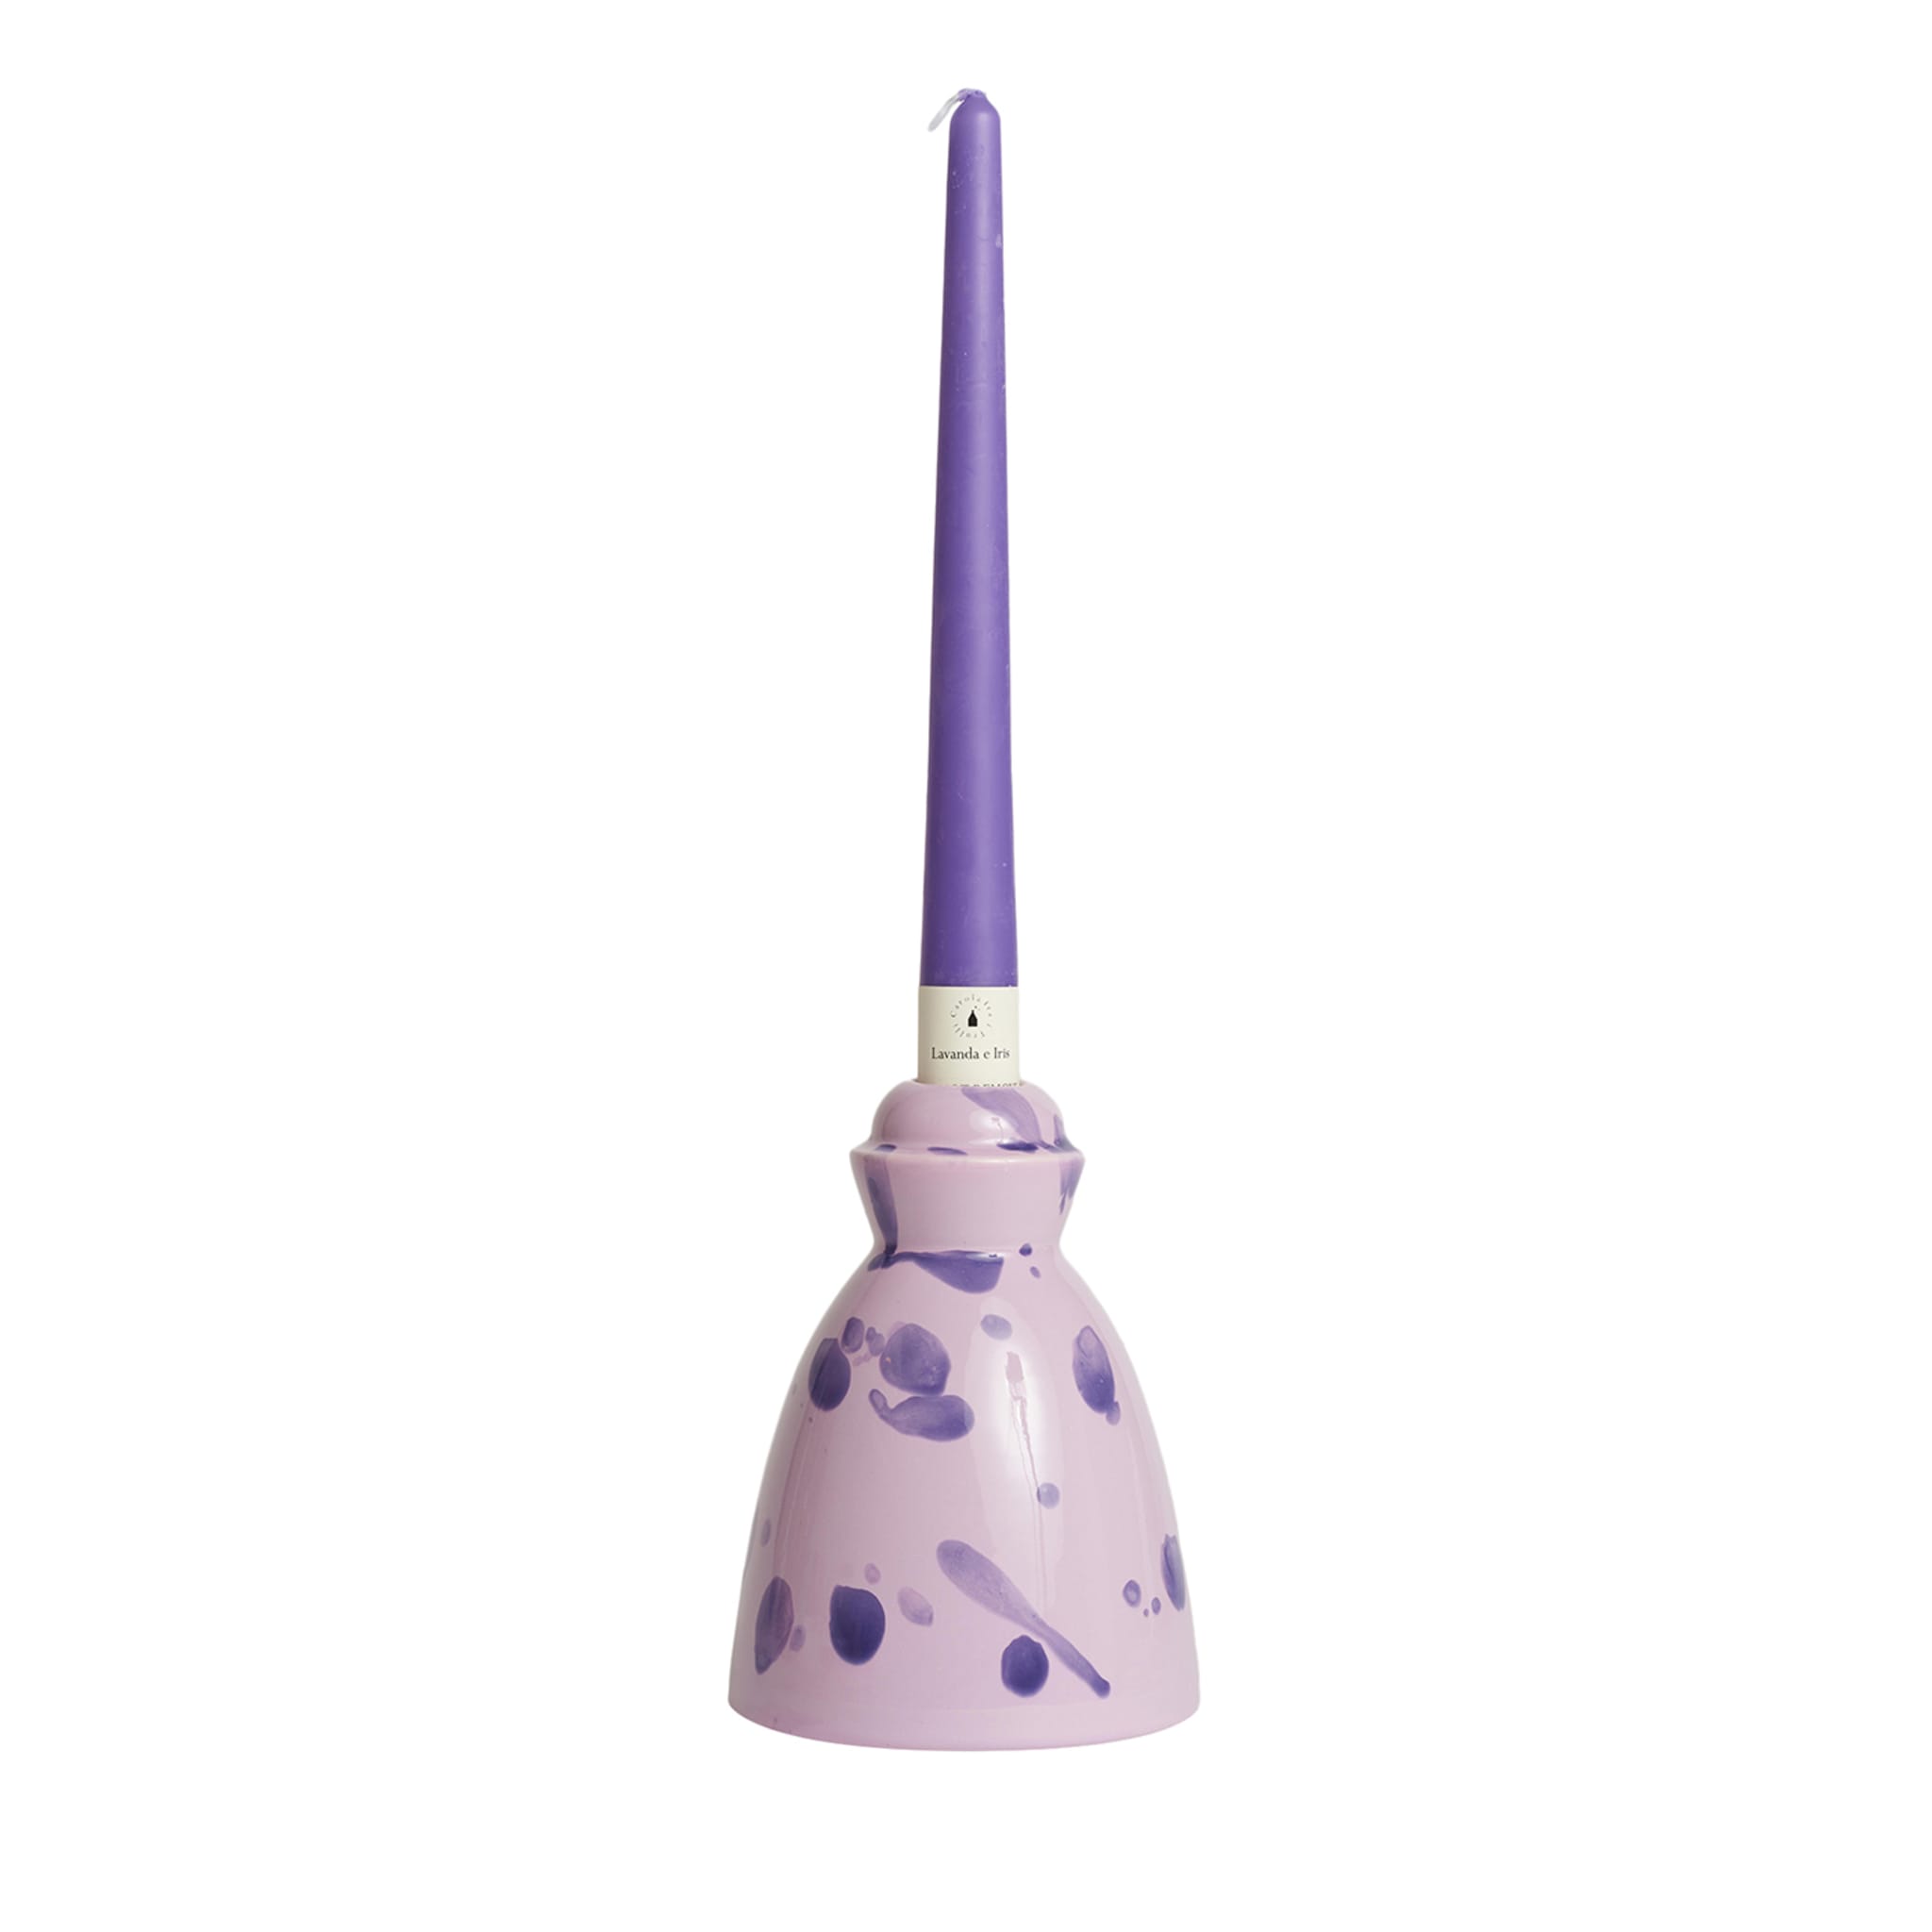 Lilac Ceramic Candlestick with 4 Beeswax Candles - Main view